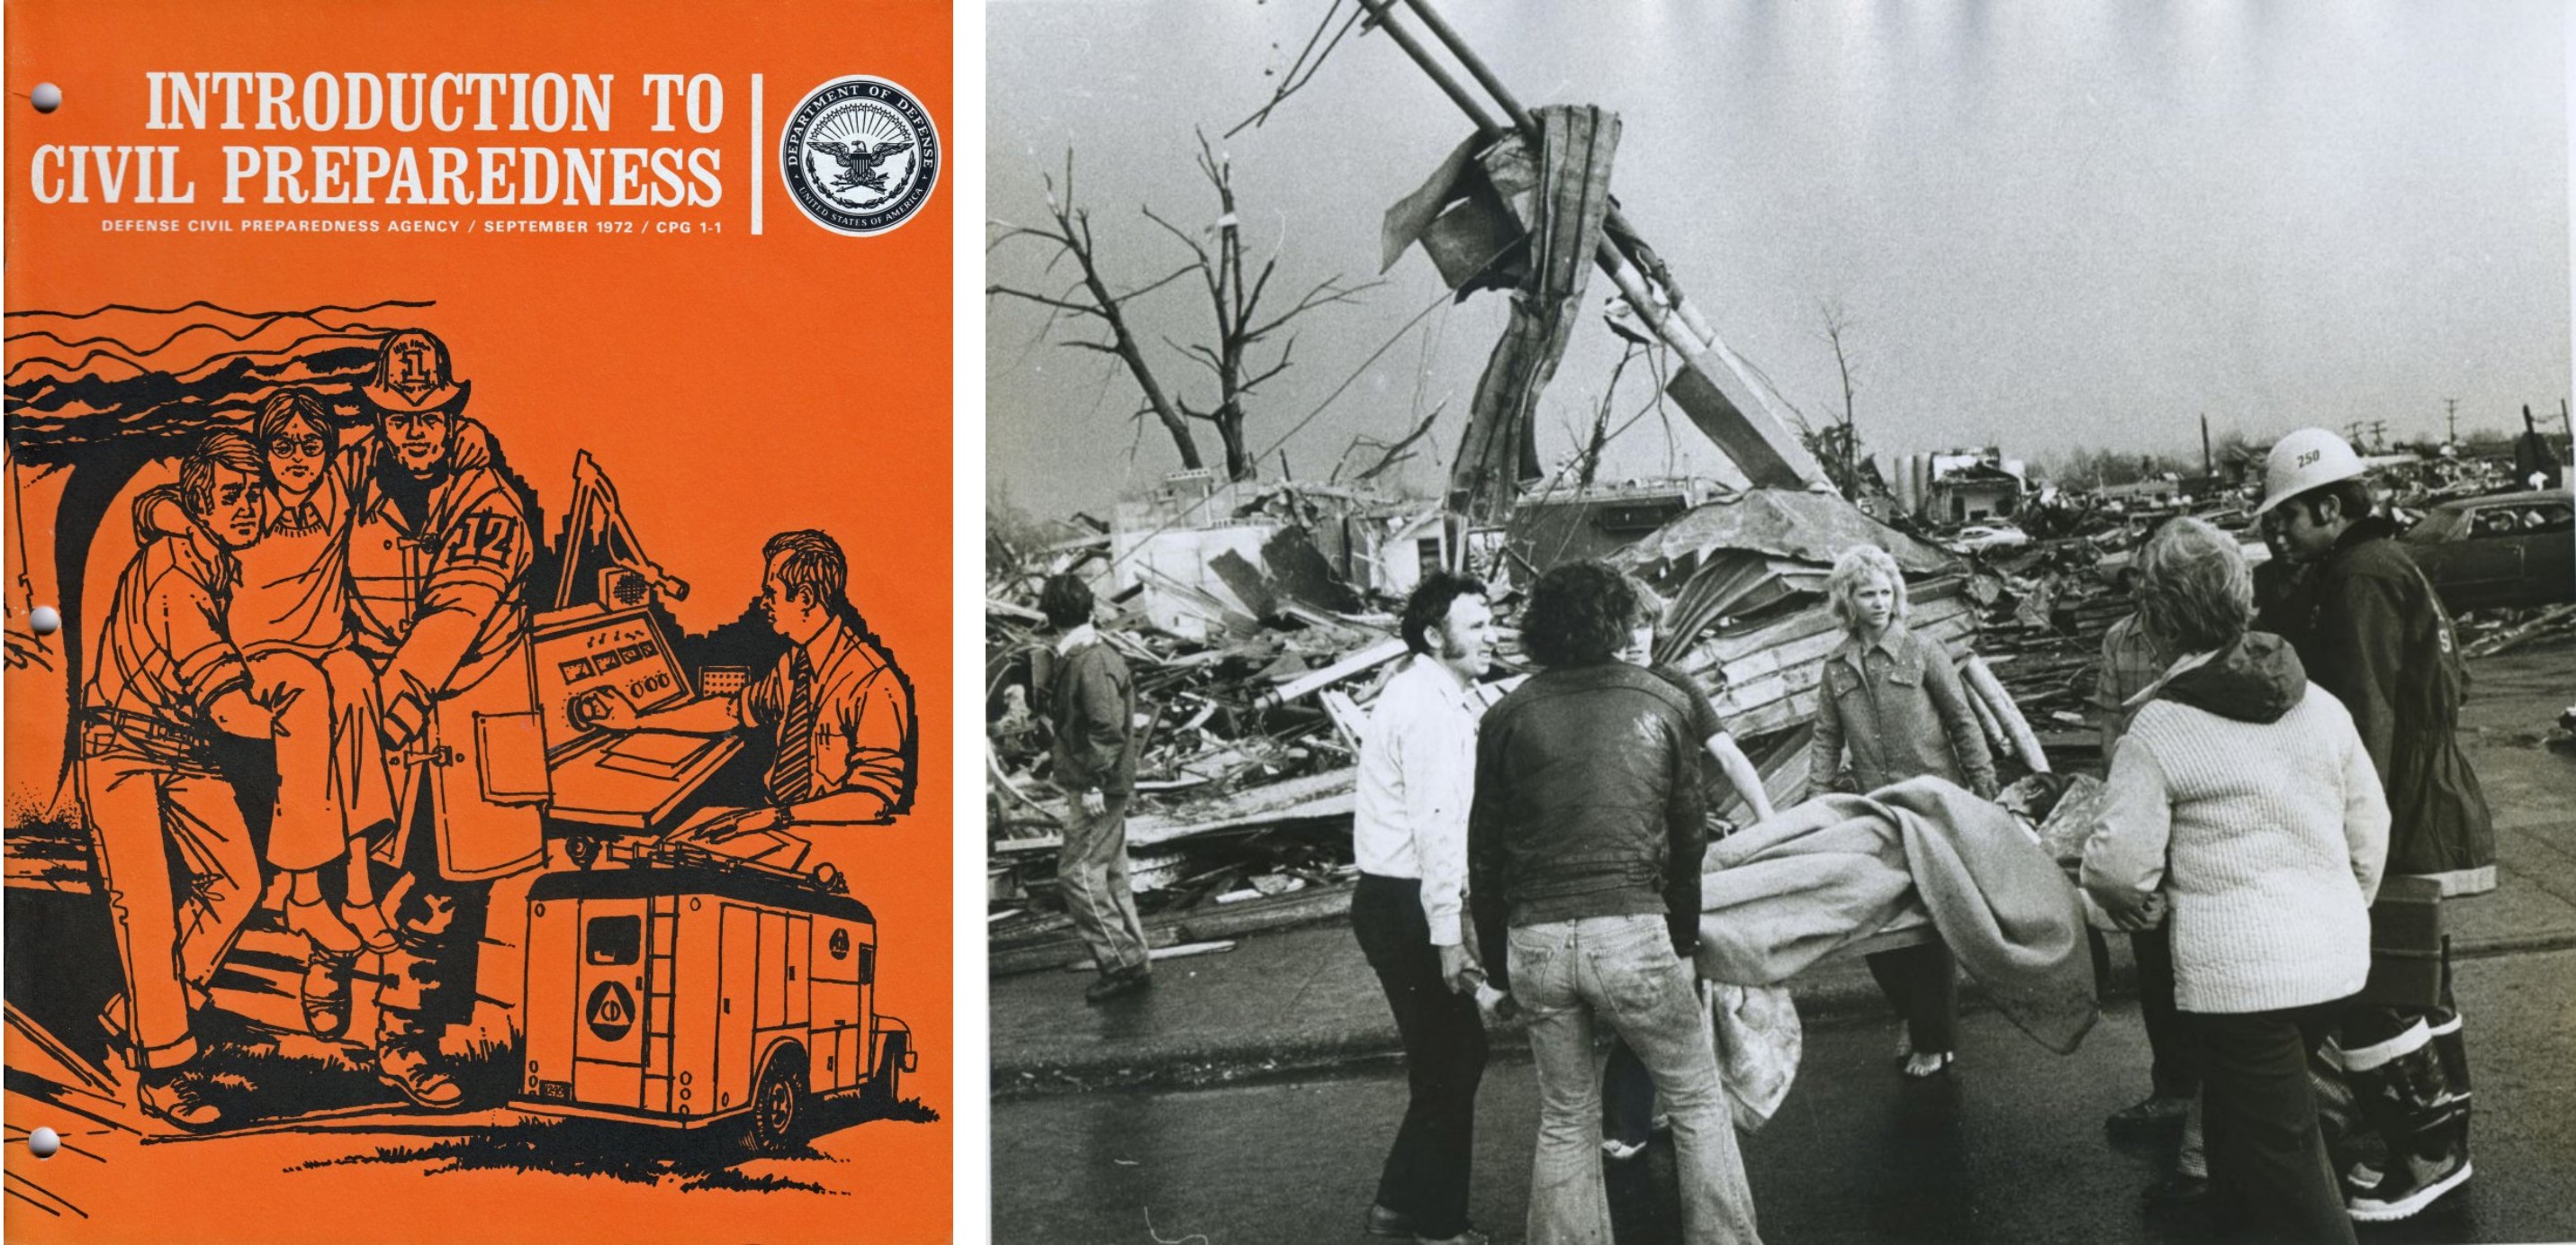 On the left, cover of a 1972 informational booklet. On the right, emergency preparedness in action during tornado recovery efforts.